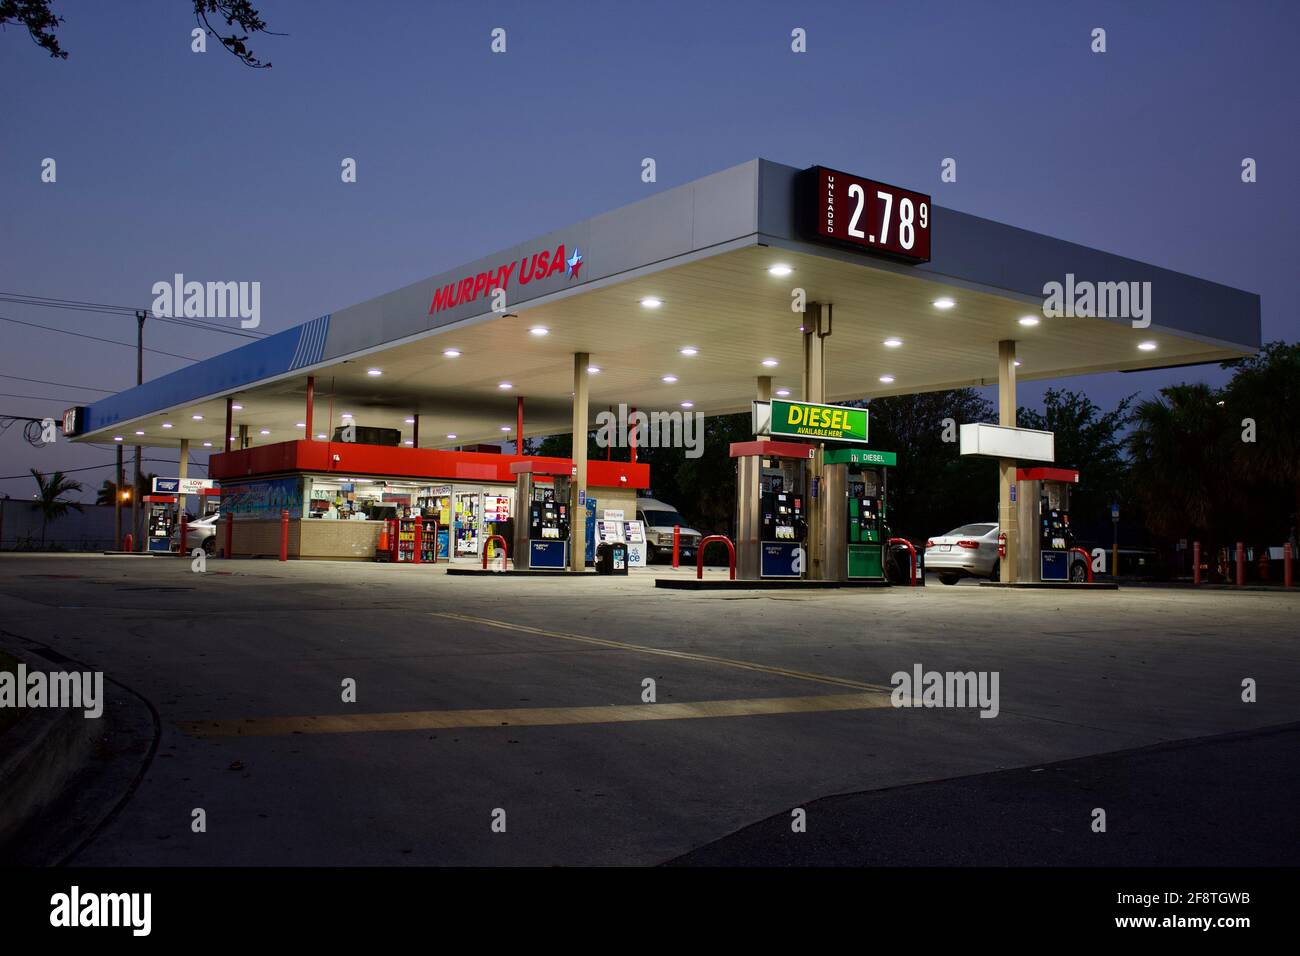 4/14/2021 Miami Florida - Murphy USA gas station and convenience store located on an out parcel of a Walmart Supercenter. Night with lights on. Stock Photo